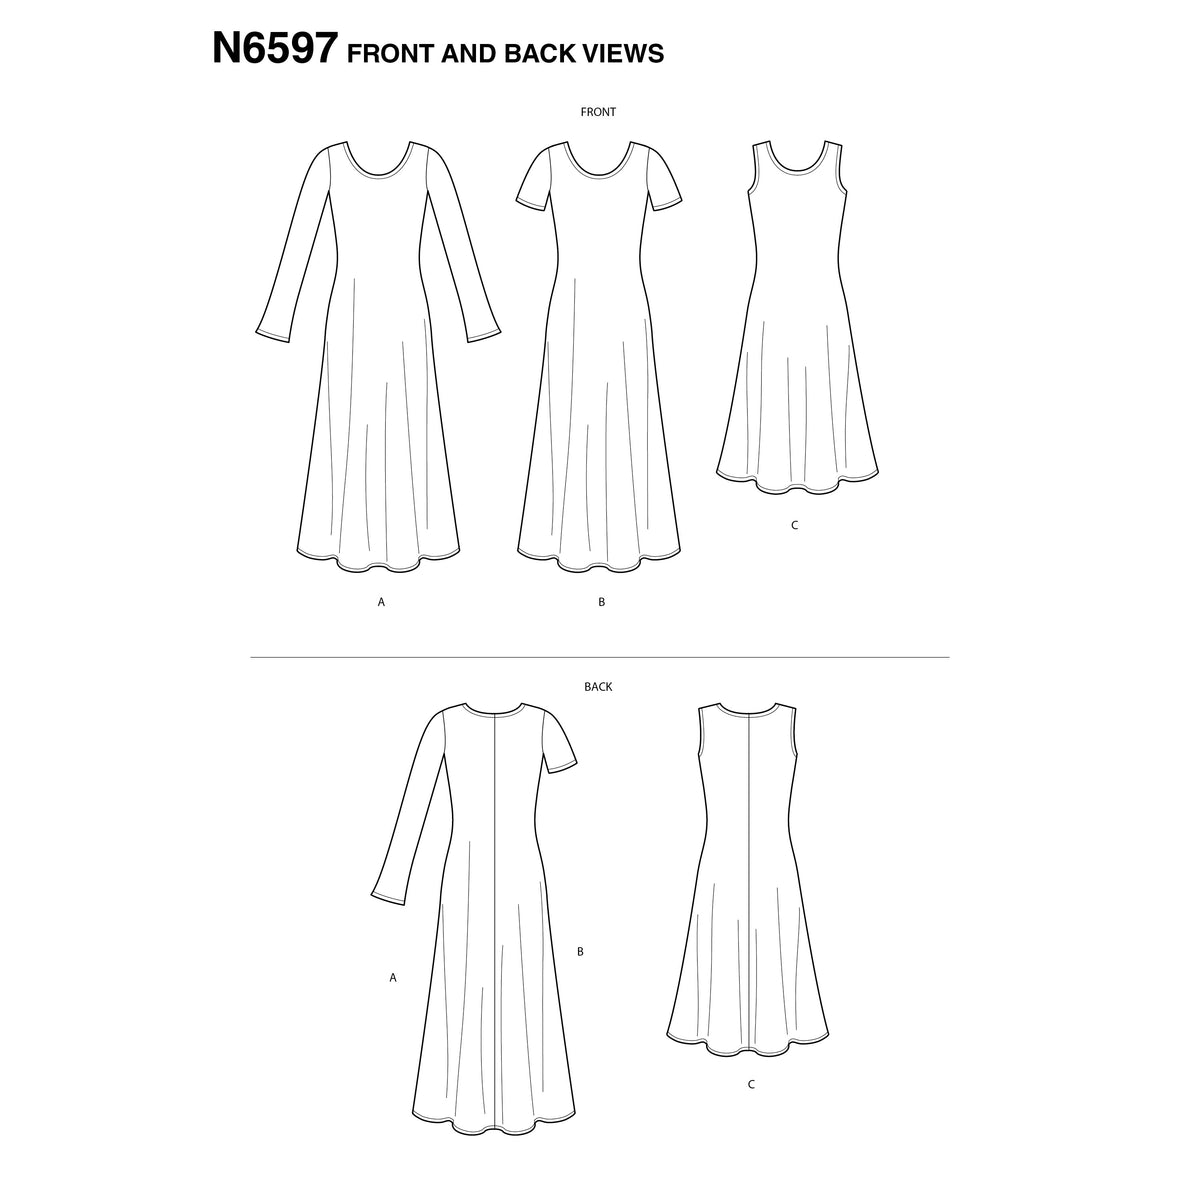 6597 New Look Sewing Pattern N6597 Misses' Knit Dress